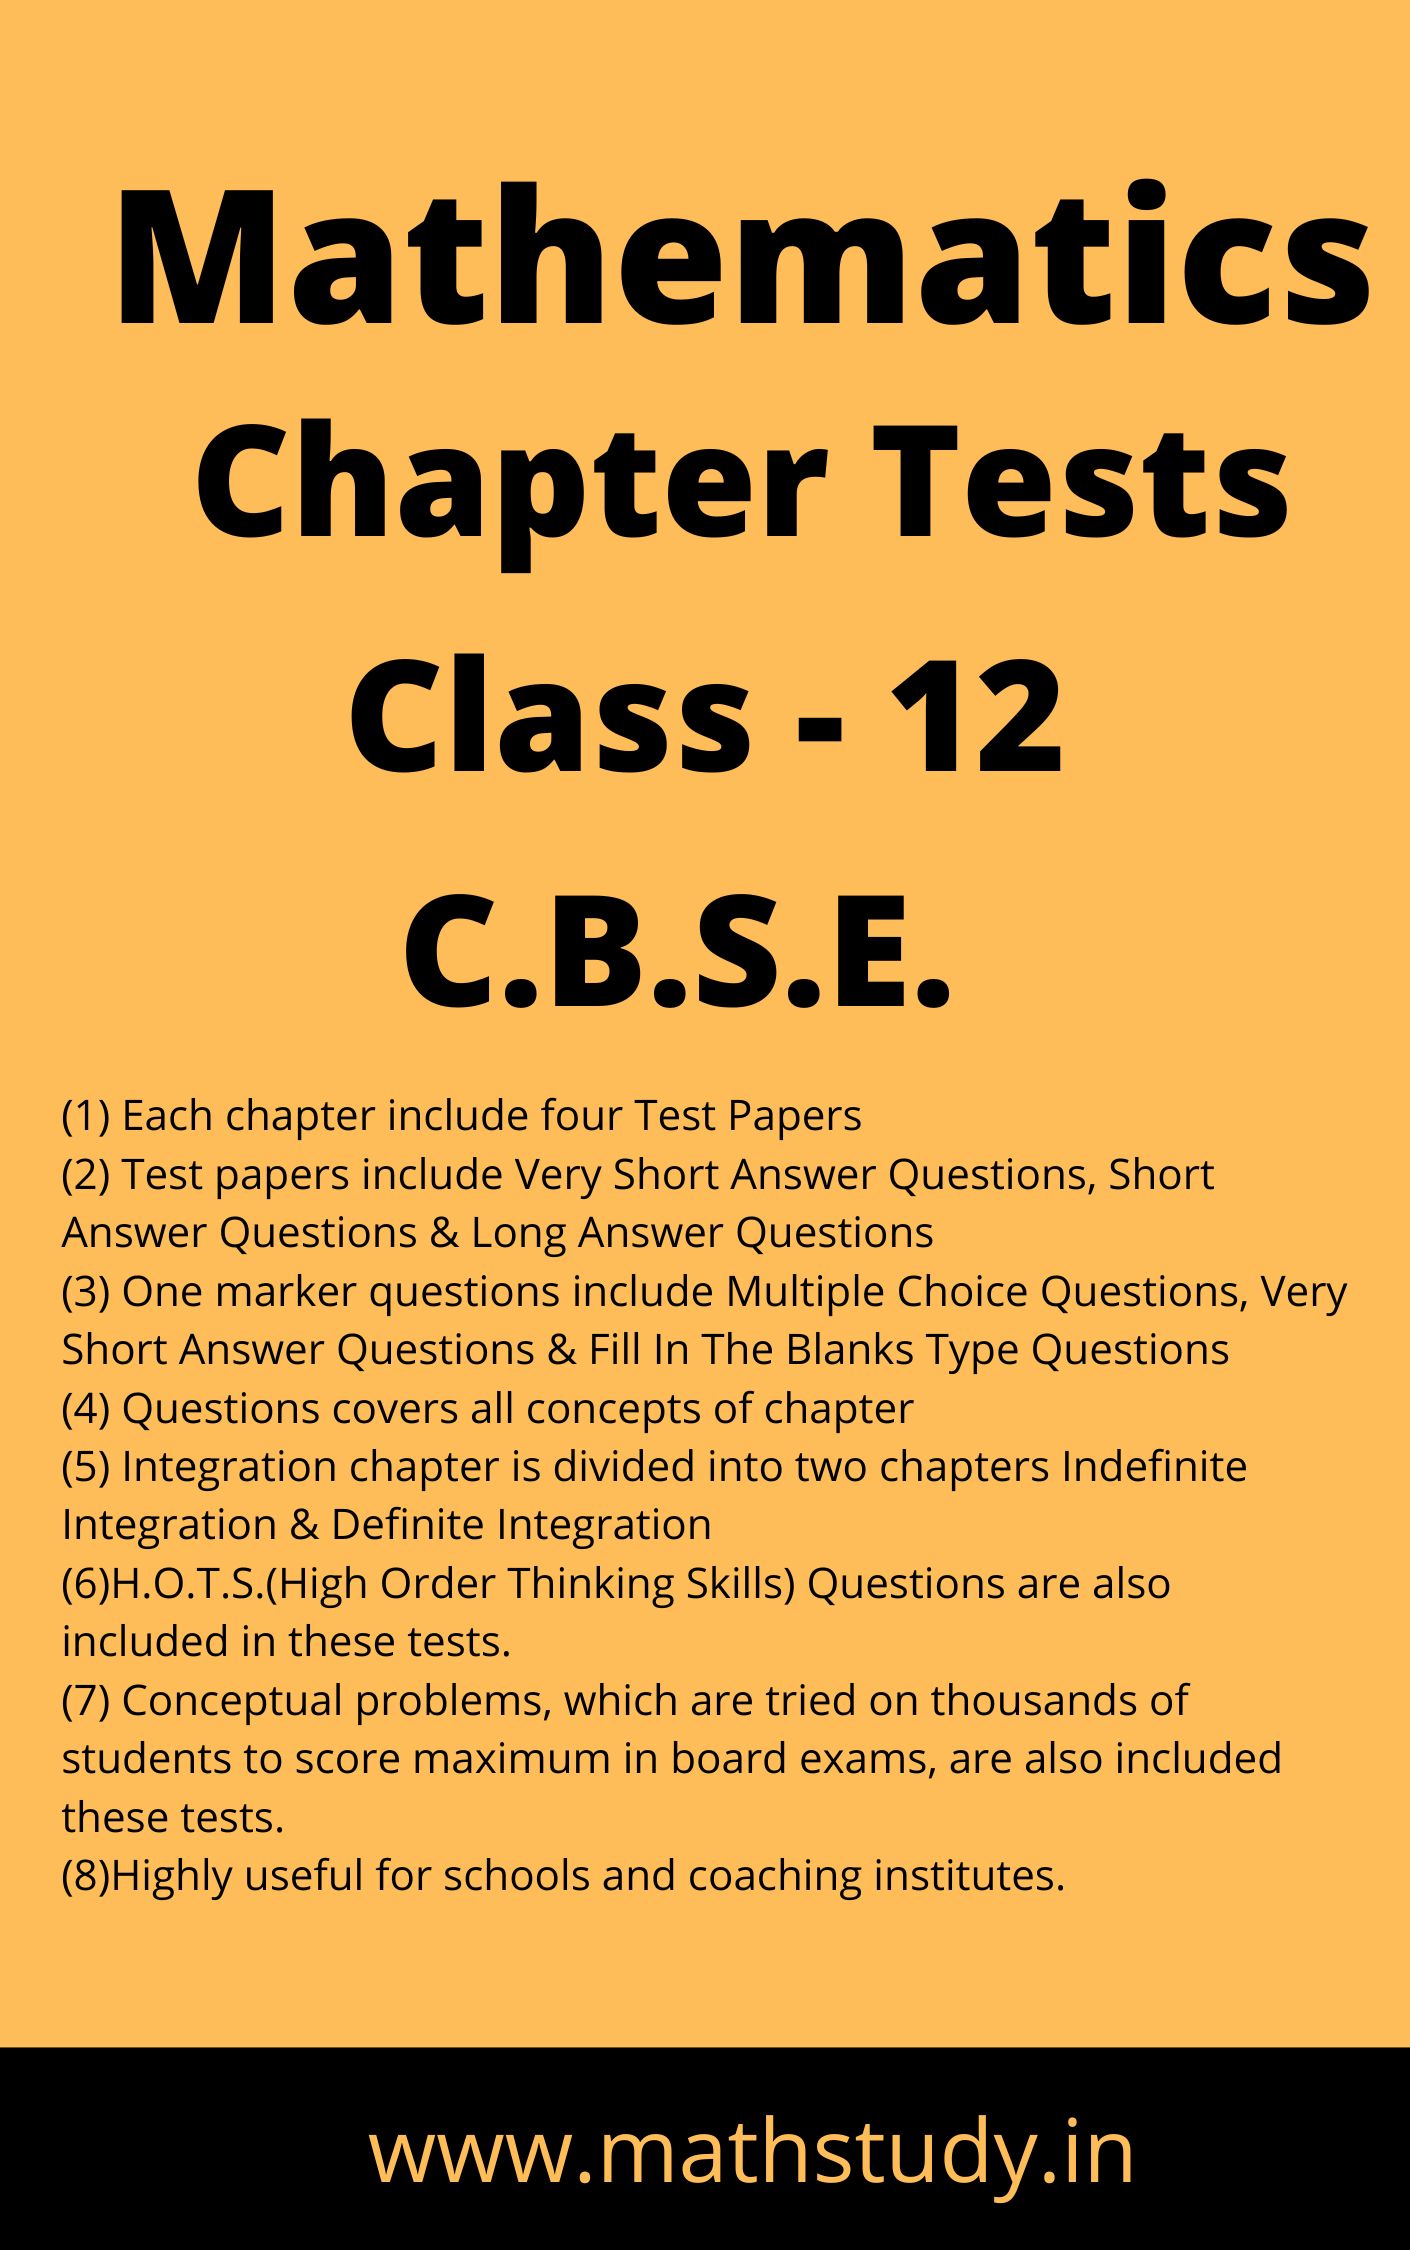 Maths Quiz Questions With Answers For Class 12 Pdf